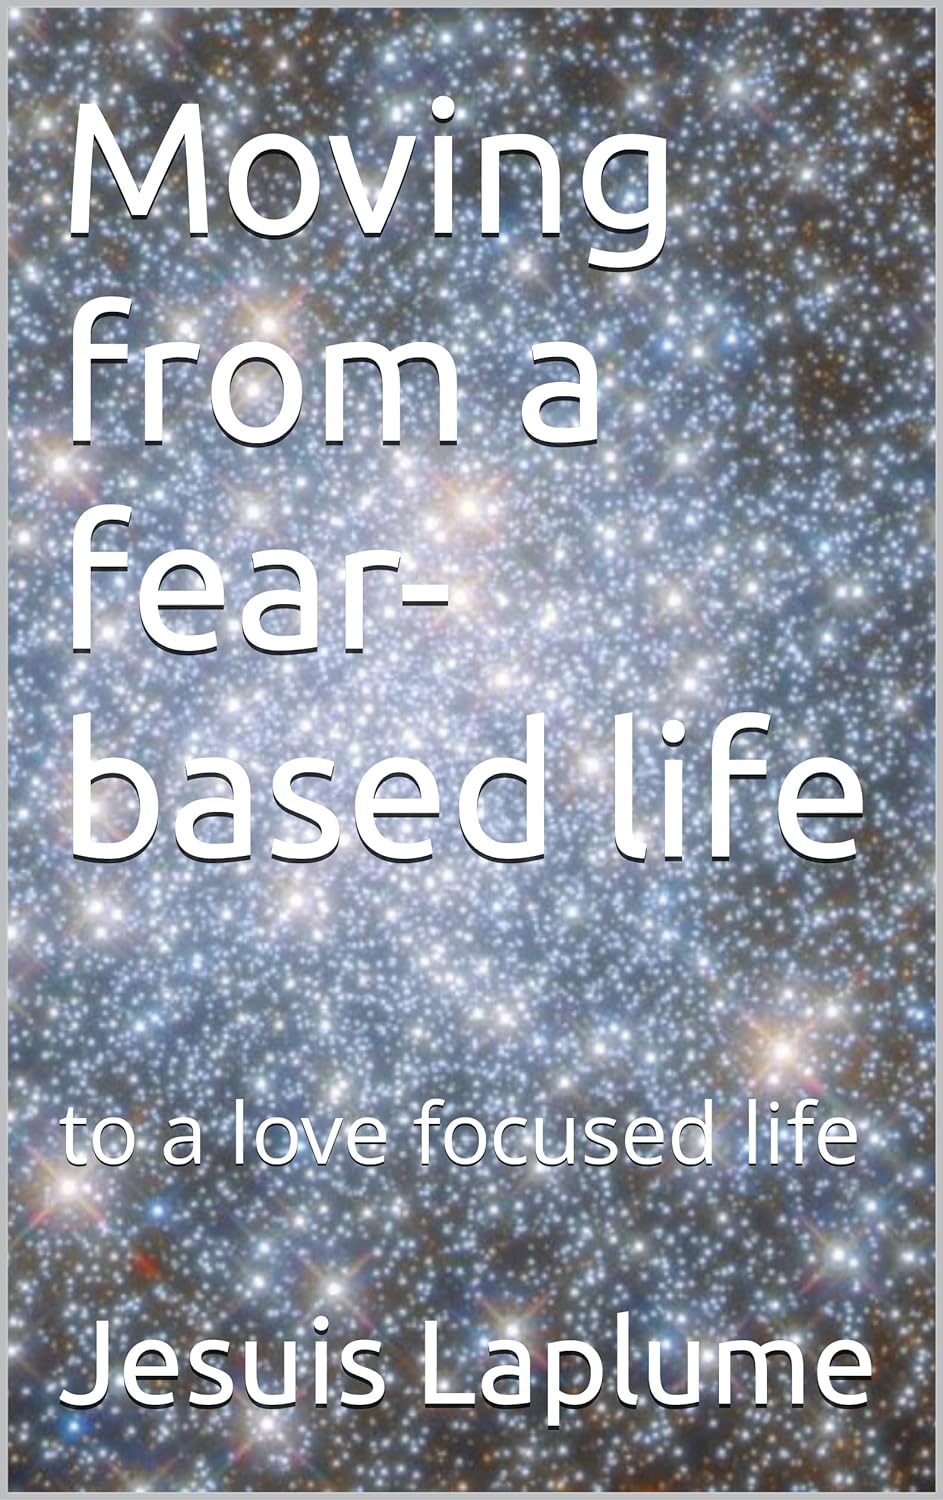 Renowned author James White inspires readers to embrace love in his latest book, "Moving from a Fear-Based Life to a Love-Focused Life."